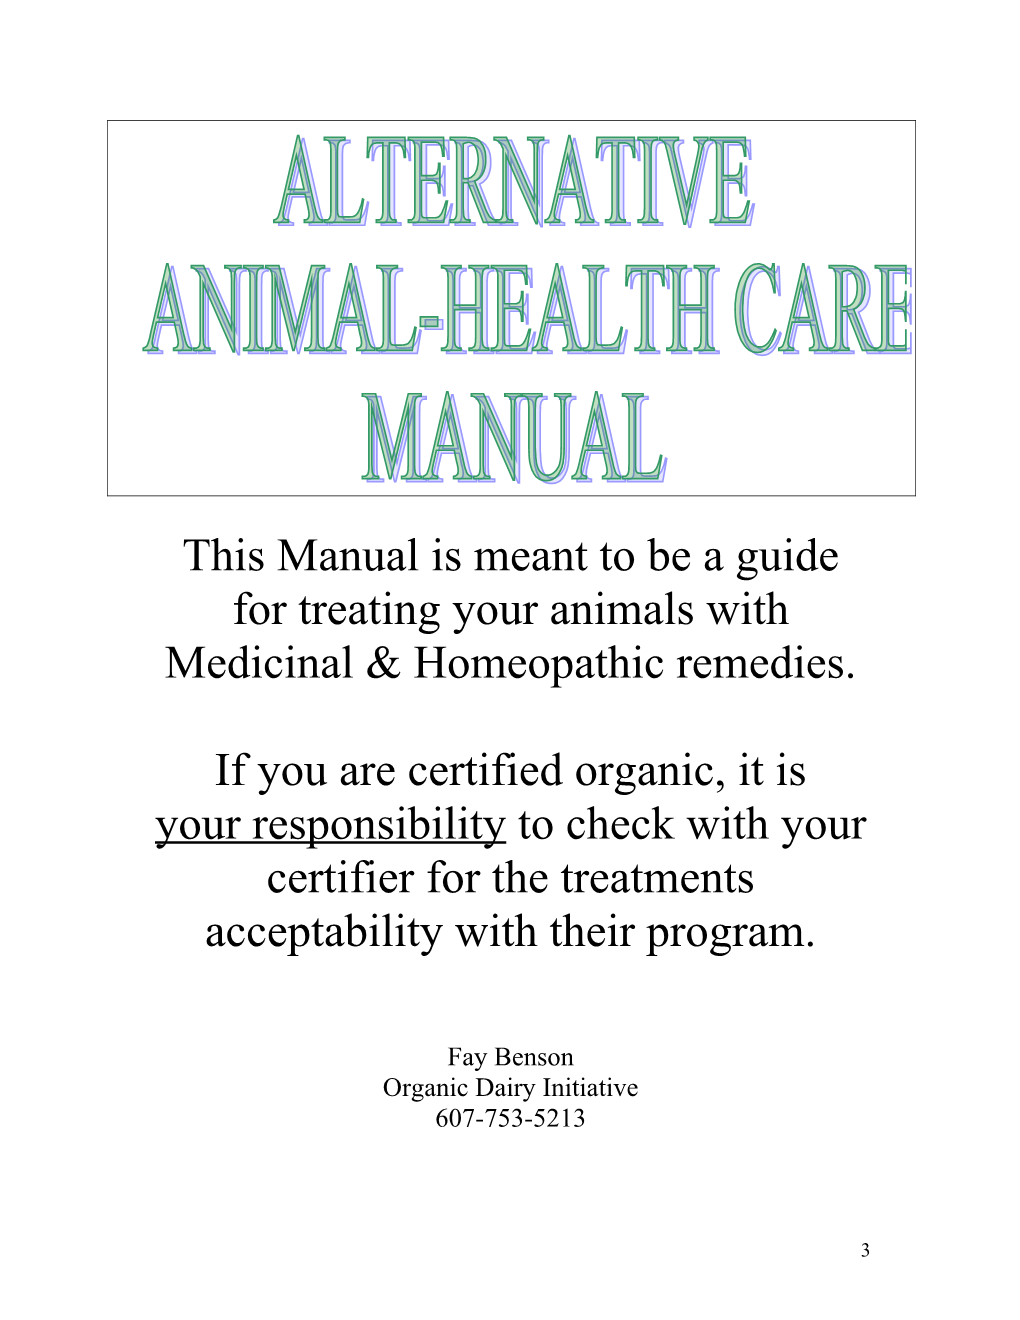 This Manual Is Meant to Be a Guide for Treating Your Animals with Medicinal & Homeopathic